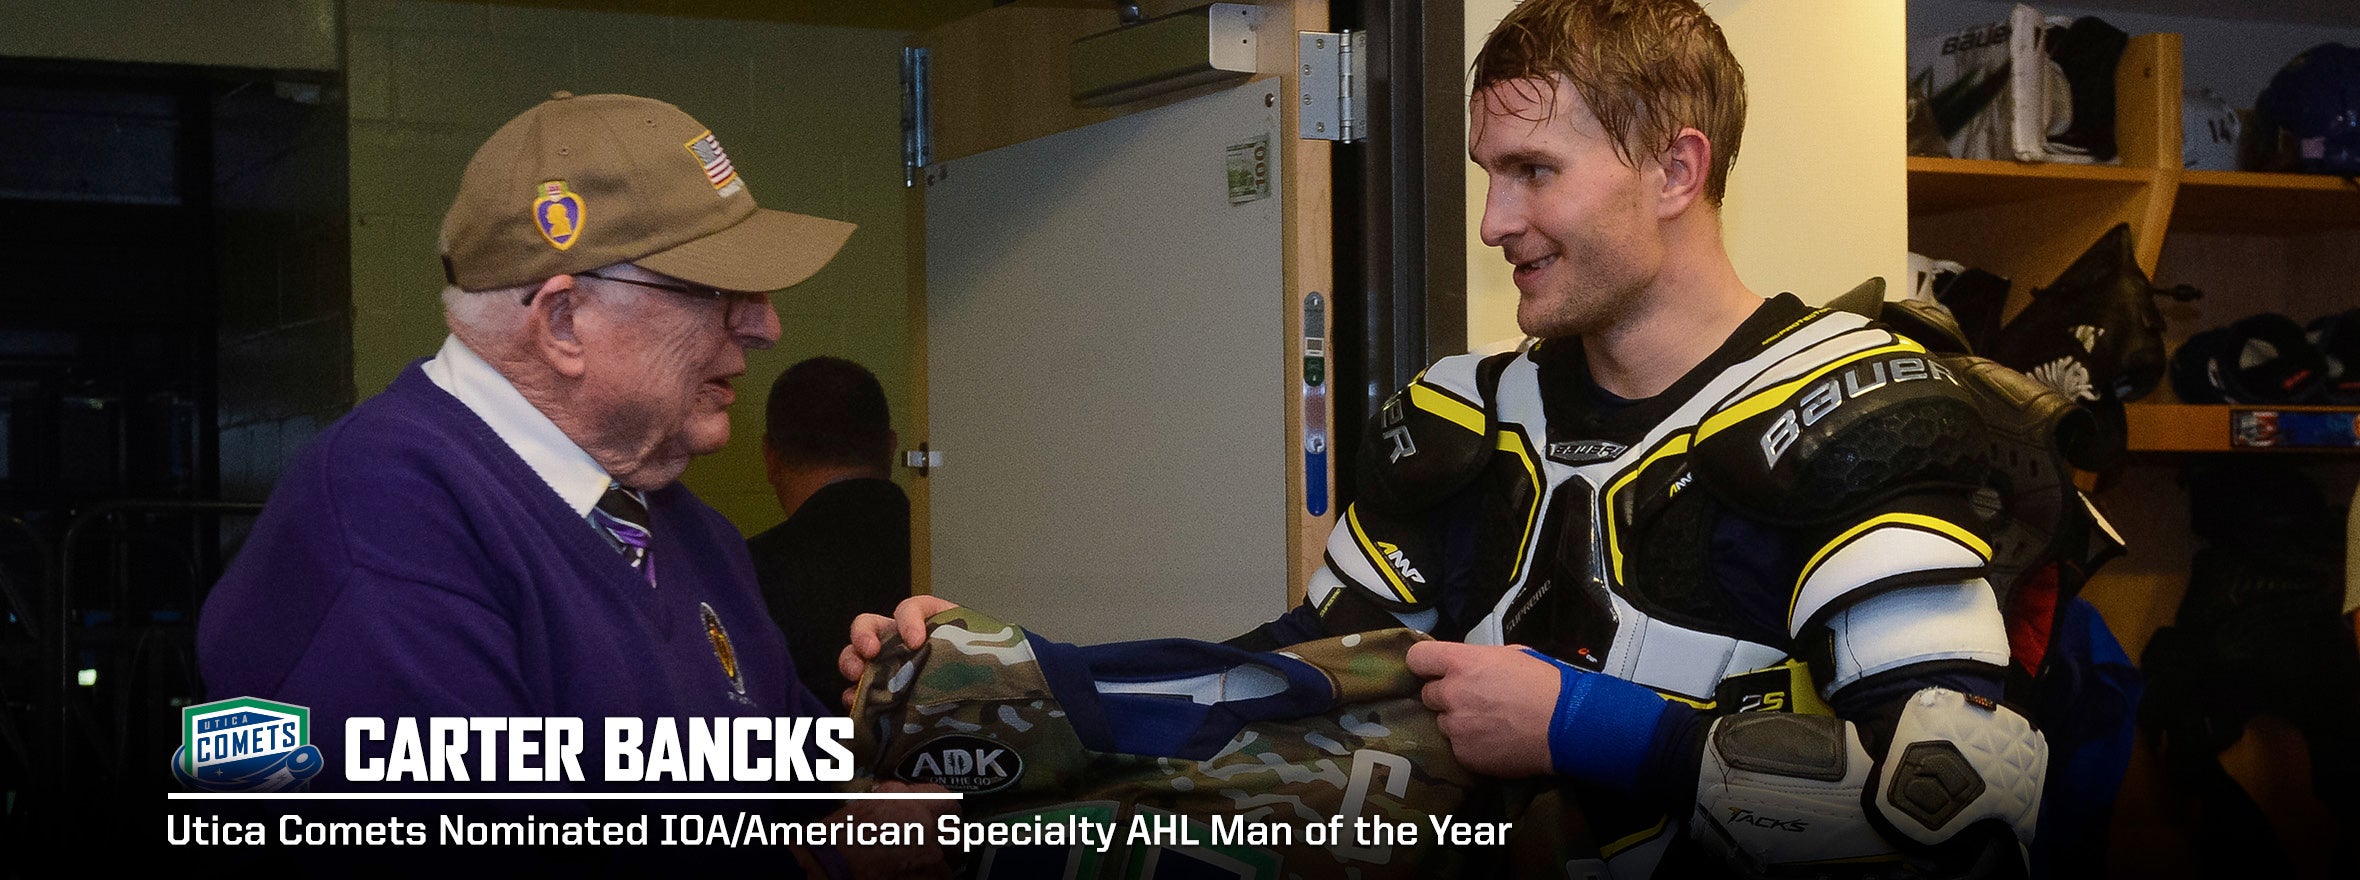 BANCKS NAMED COMETS 2019-20 SPECIALTY MAN OF THE YEAR